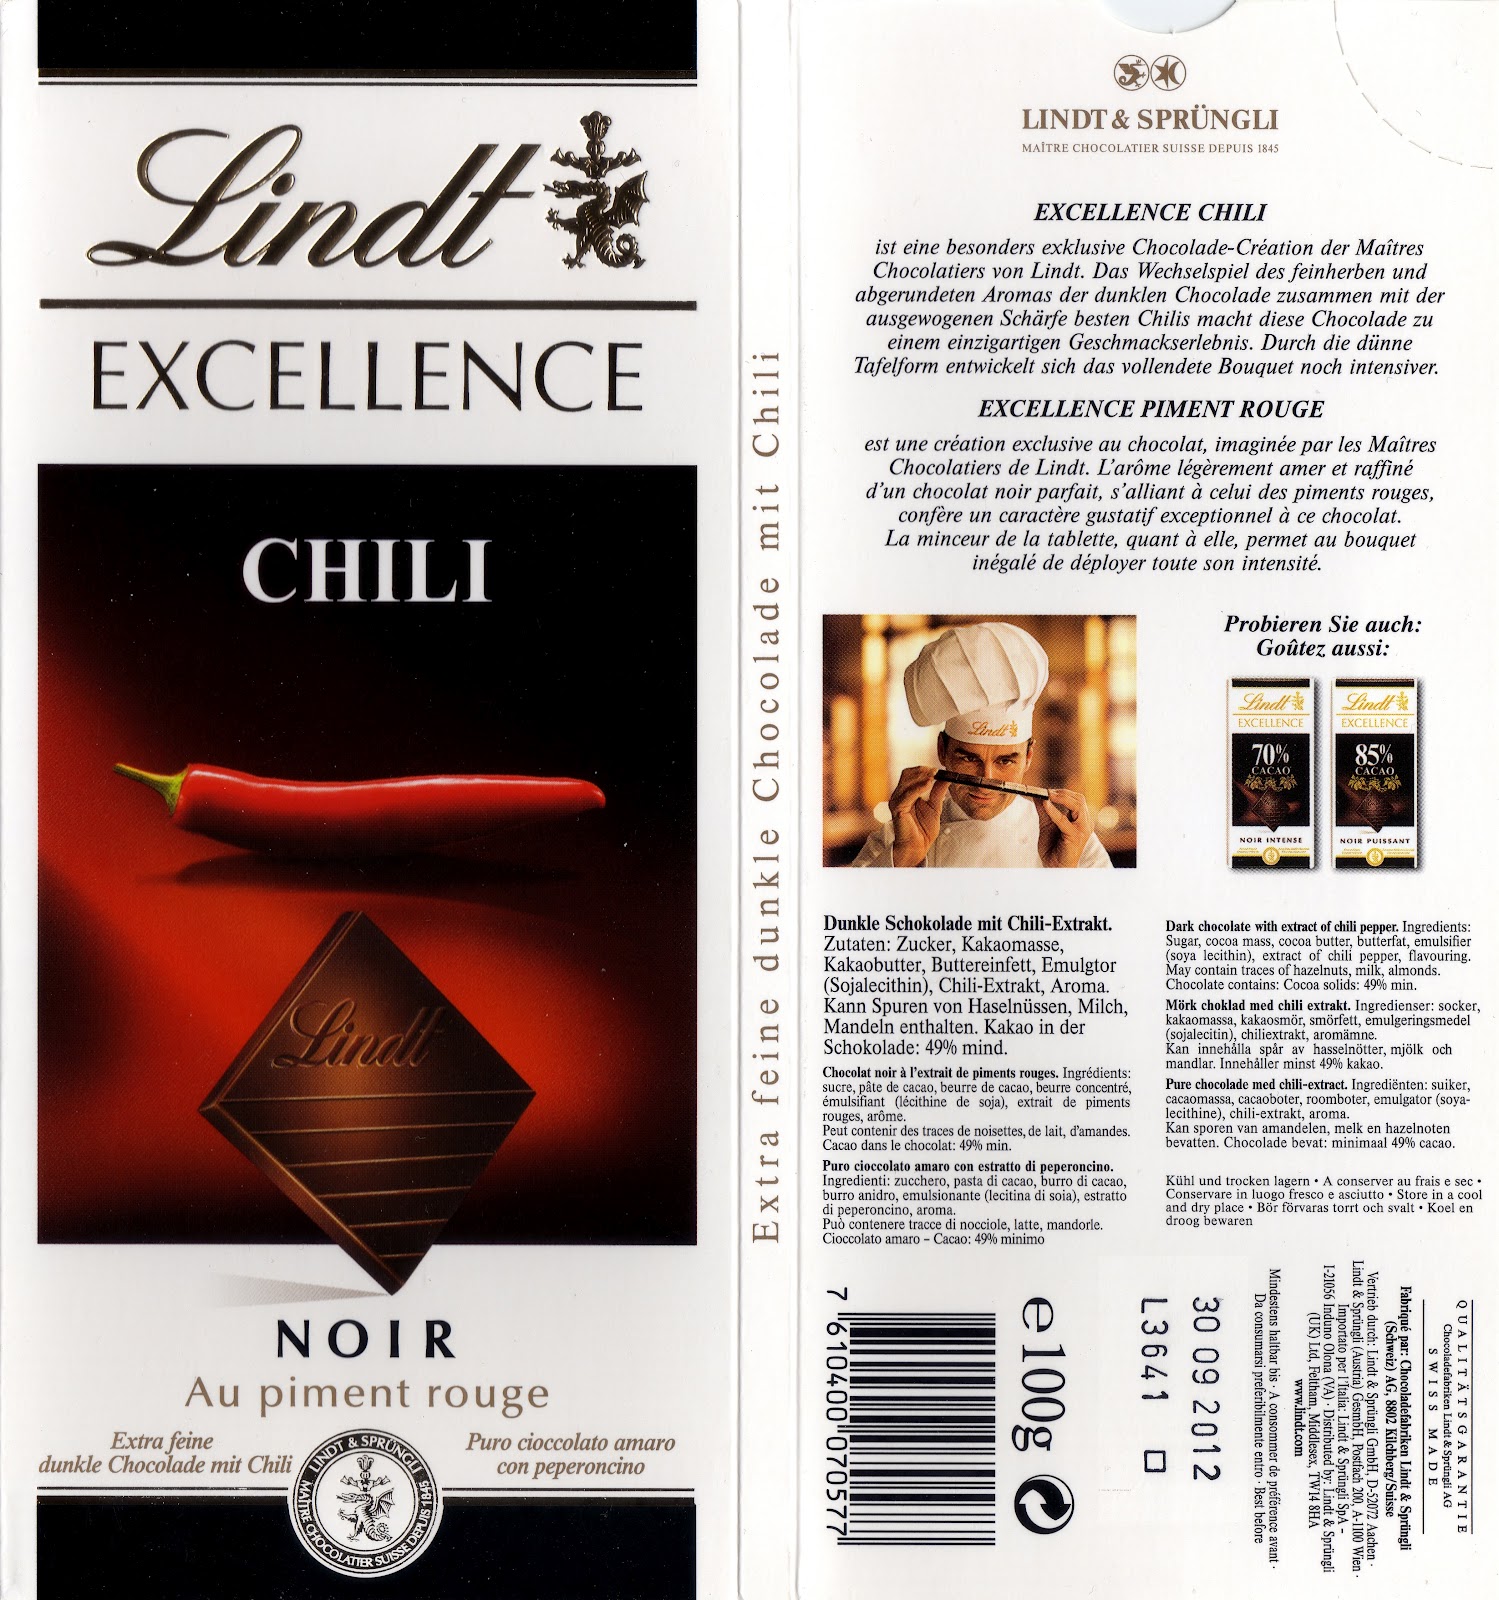 NG+Lindt+Excellence+Chili.jpg